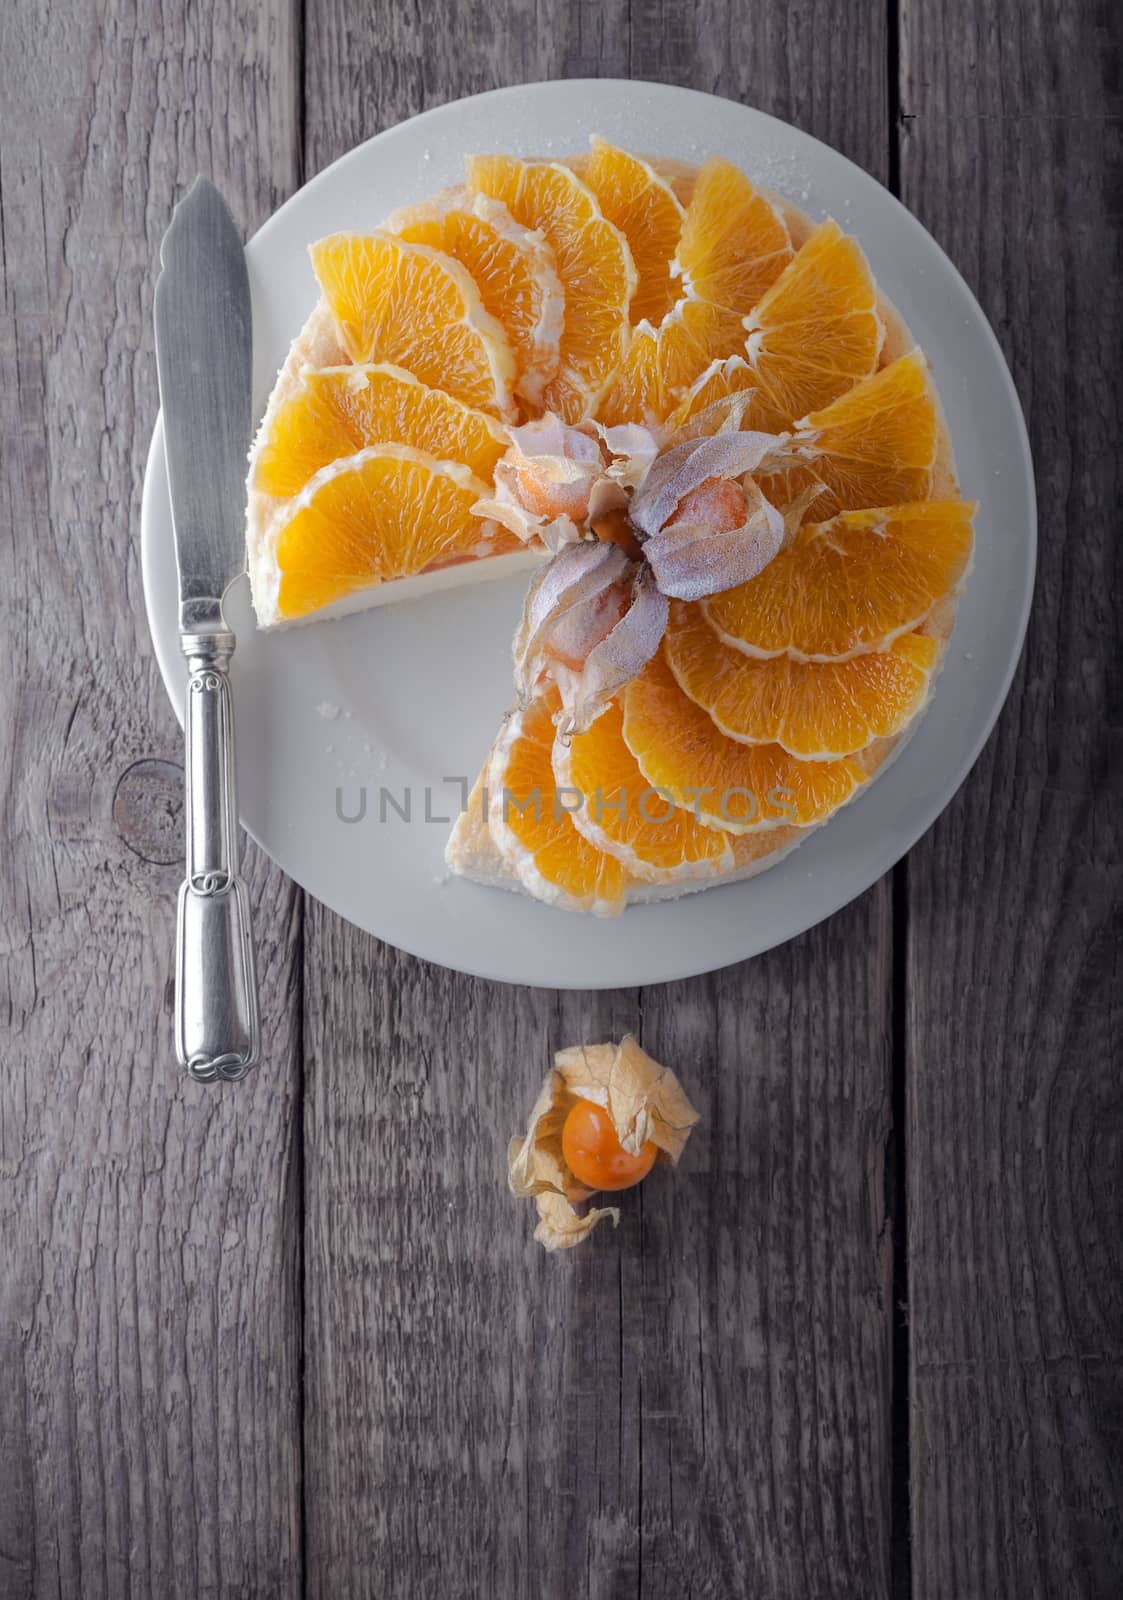 Cheesecake decorated with oranges and physalis. by supercat67